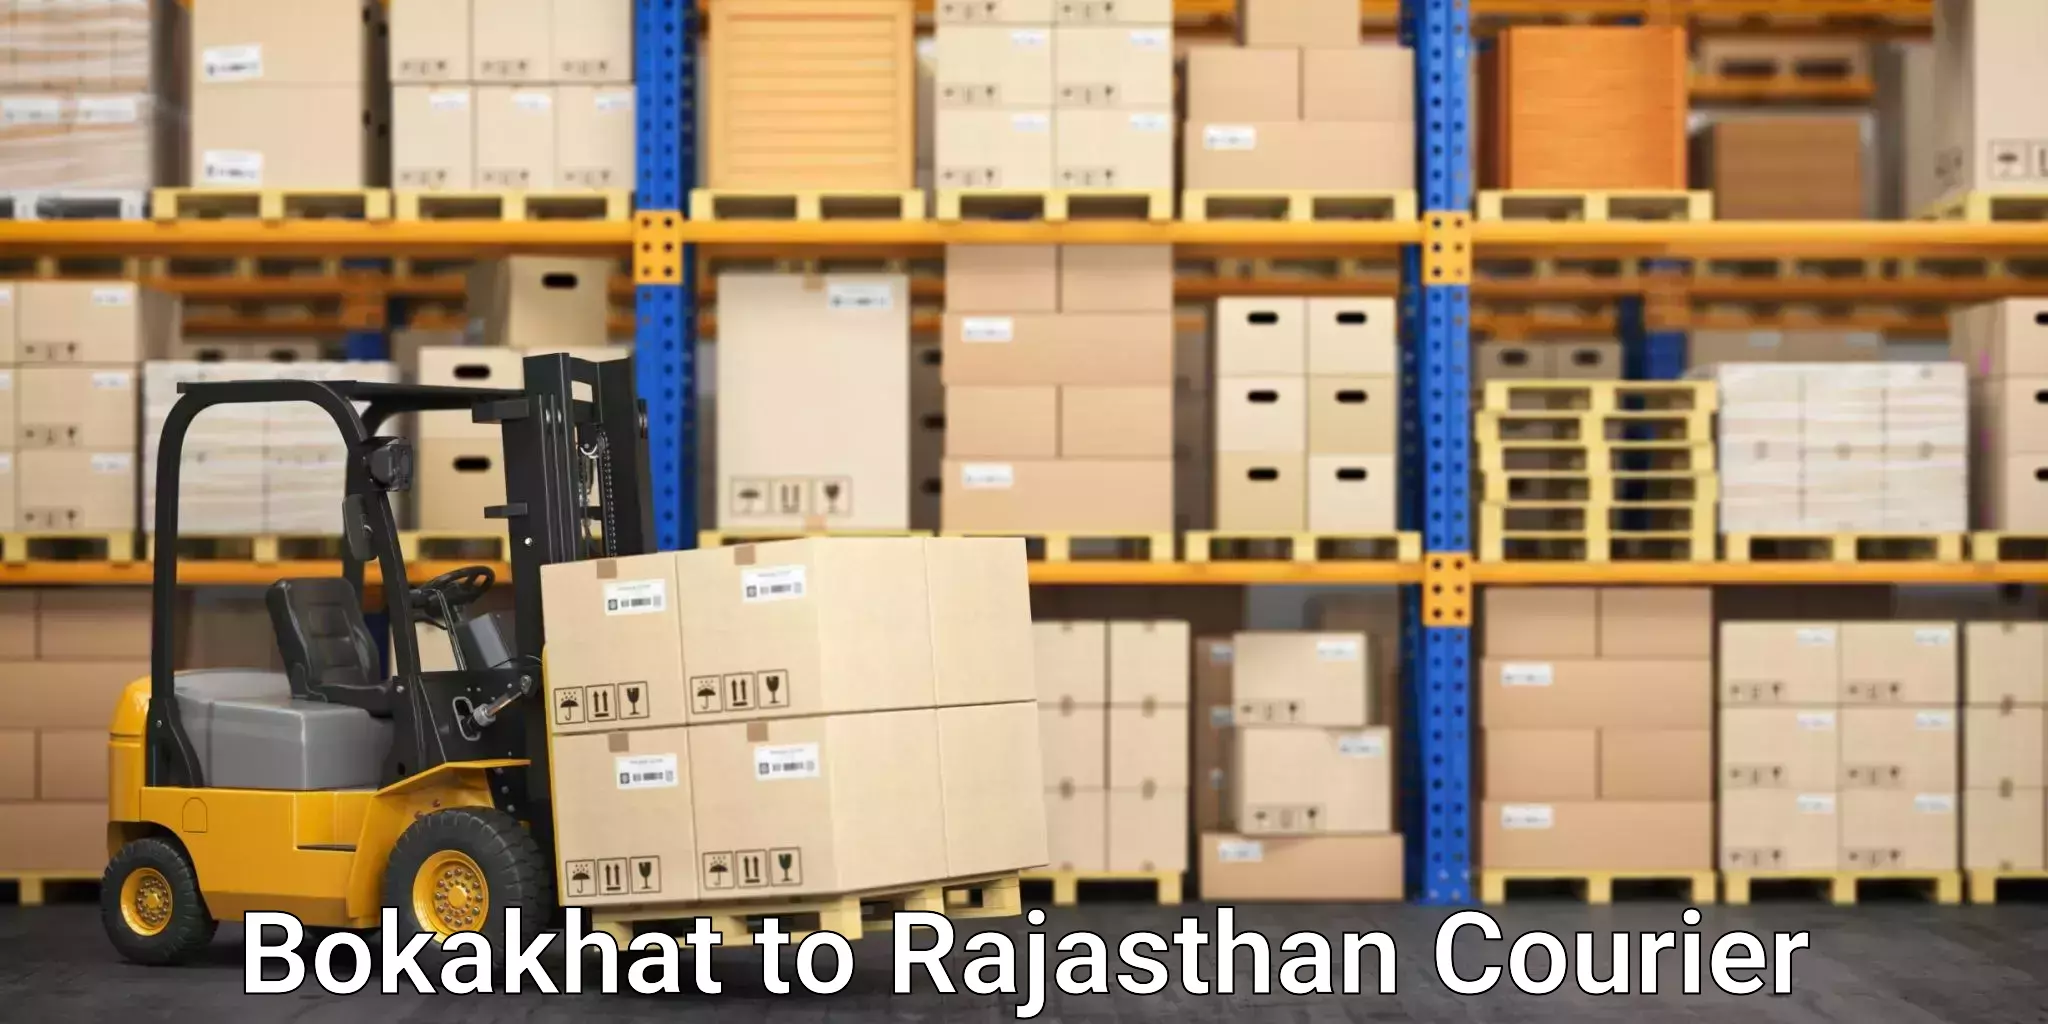 Express delivery capabilities in Bokakhat to Kishangarh